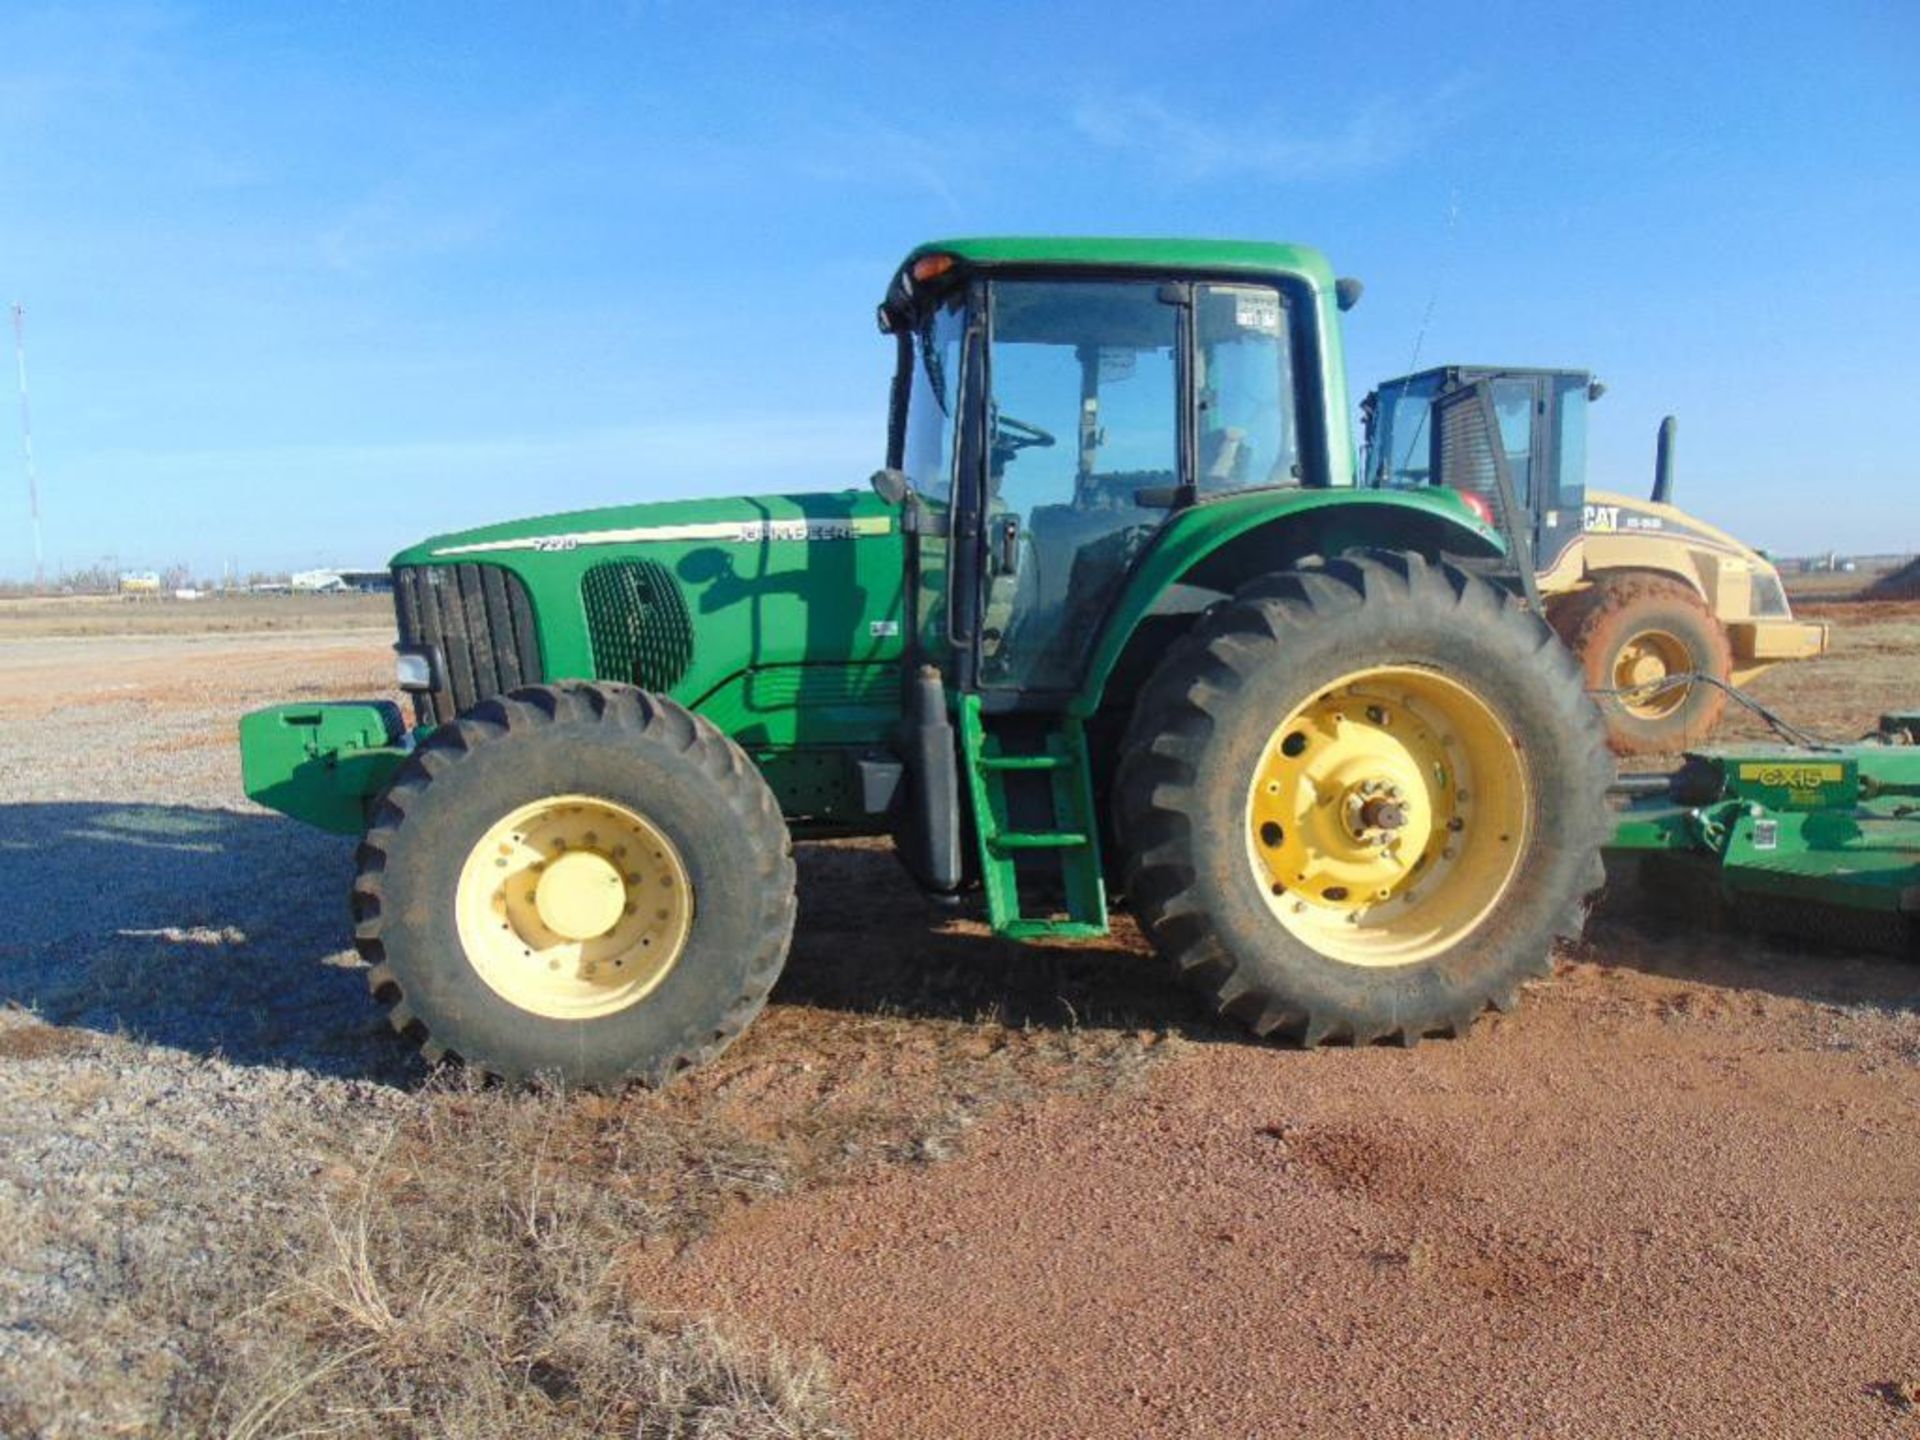 2006 John Deere 7220 MFWD Farm Tractor s/n r047801 Cab,a/c,3pt,hyd outlets - Image 2 of 4